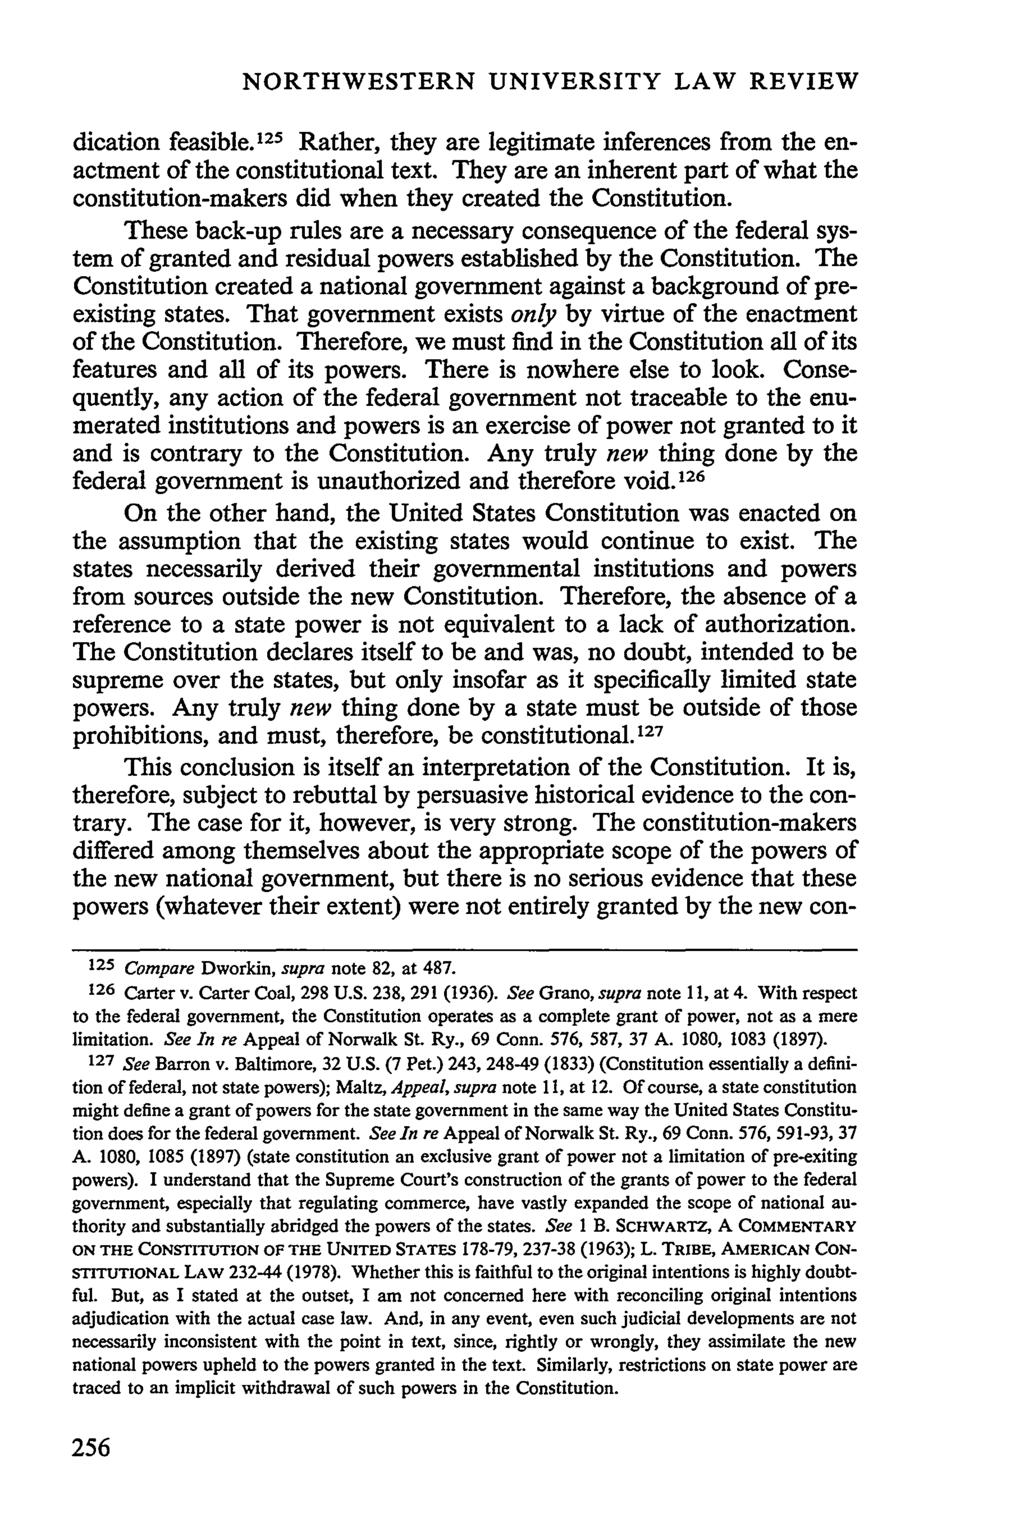 NORTHWESTERN UNIVERSITY LAW REVIEW dication feasible. 125 Rather, they are legitimate inferences from the enactment of the constitutional text.